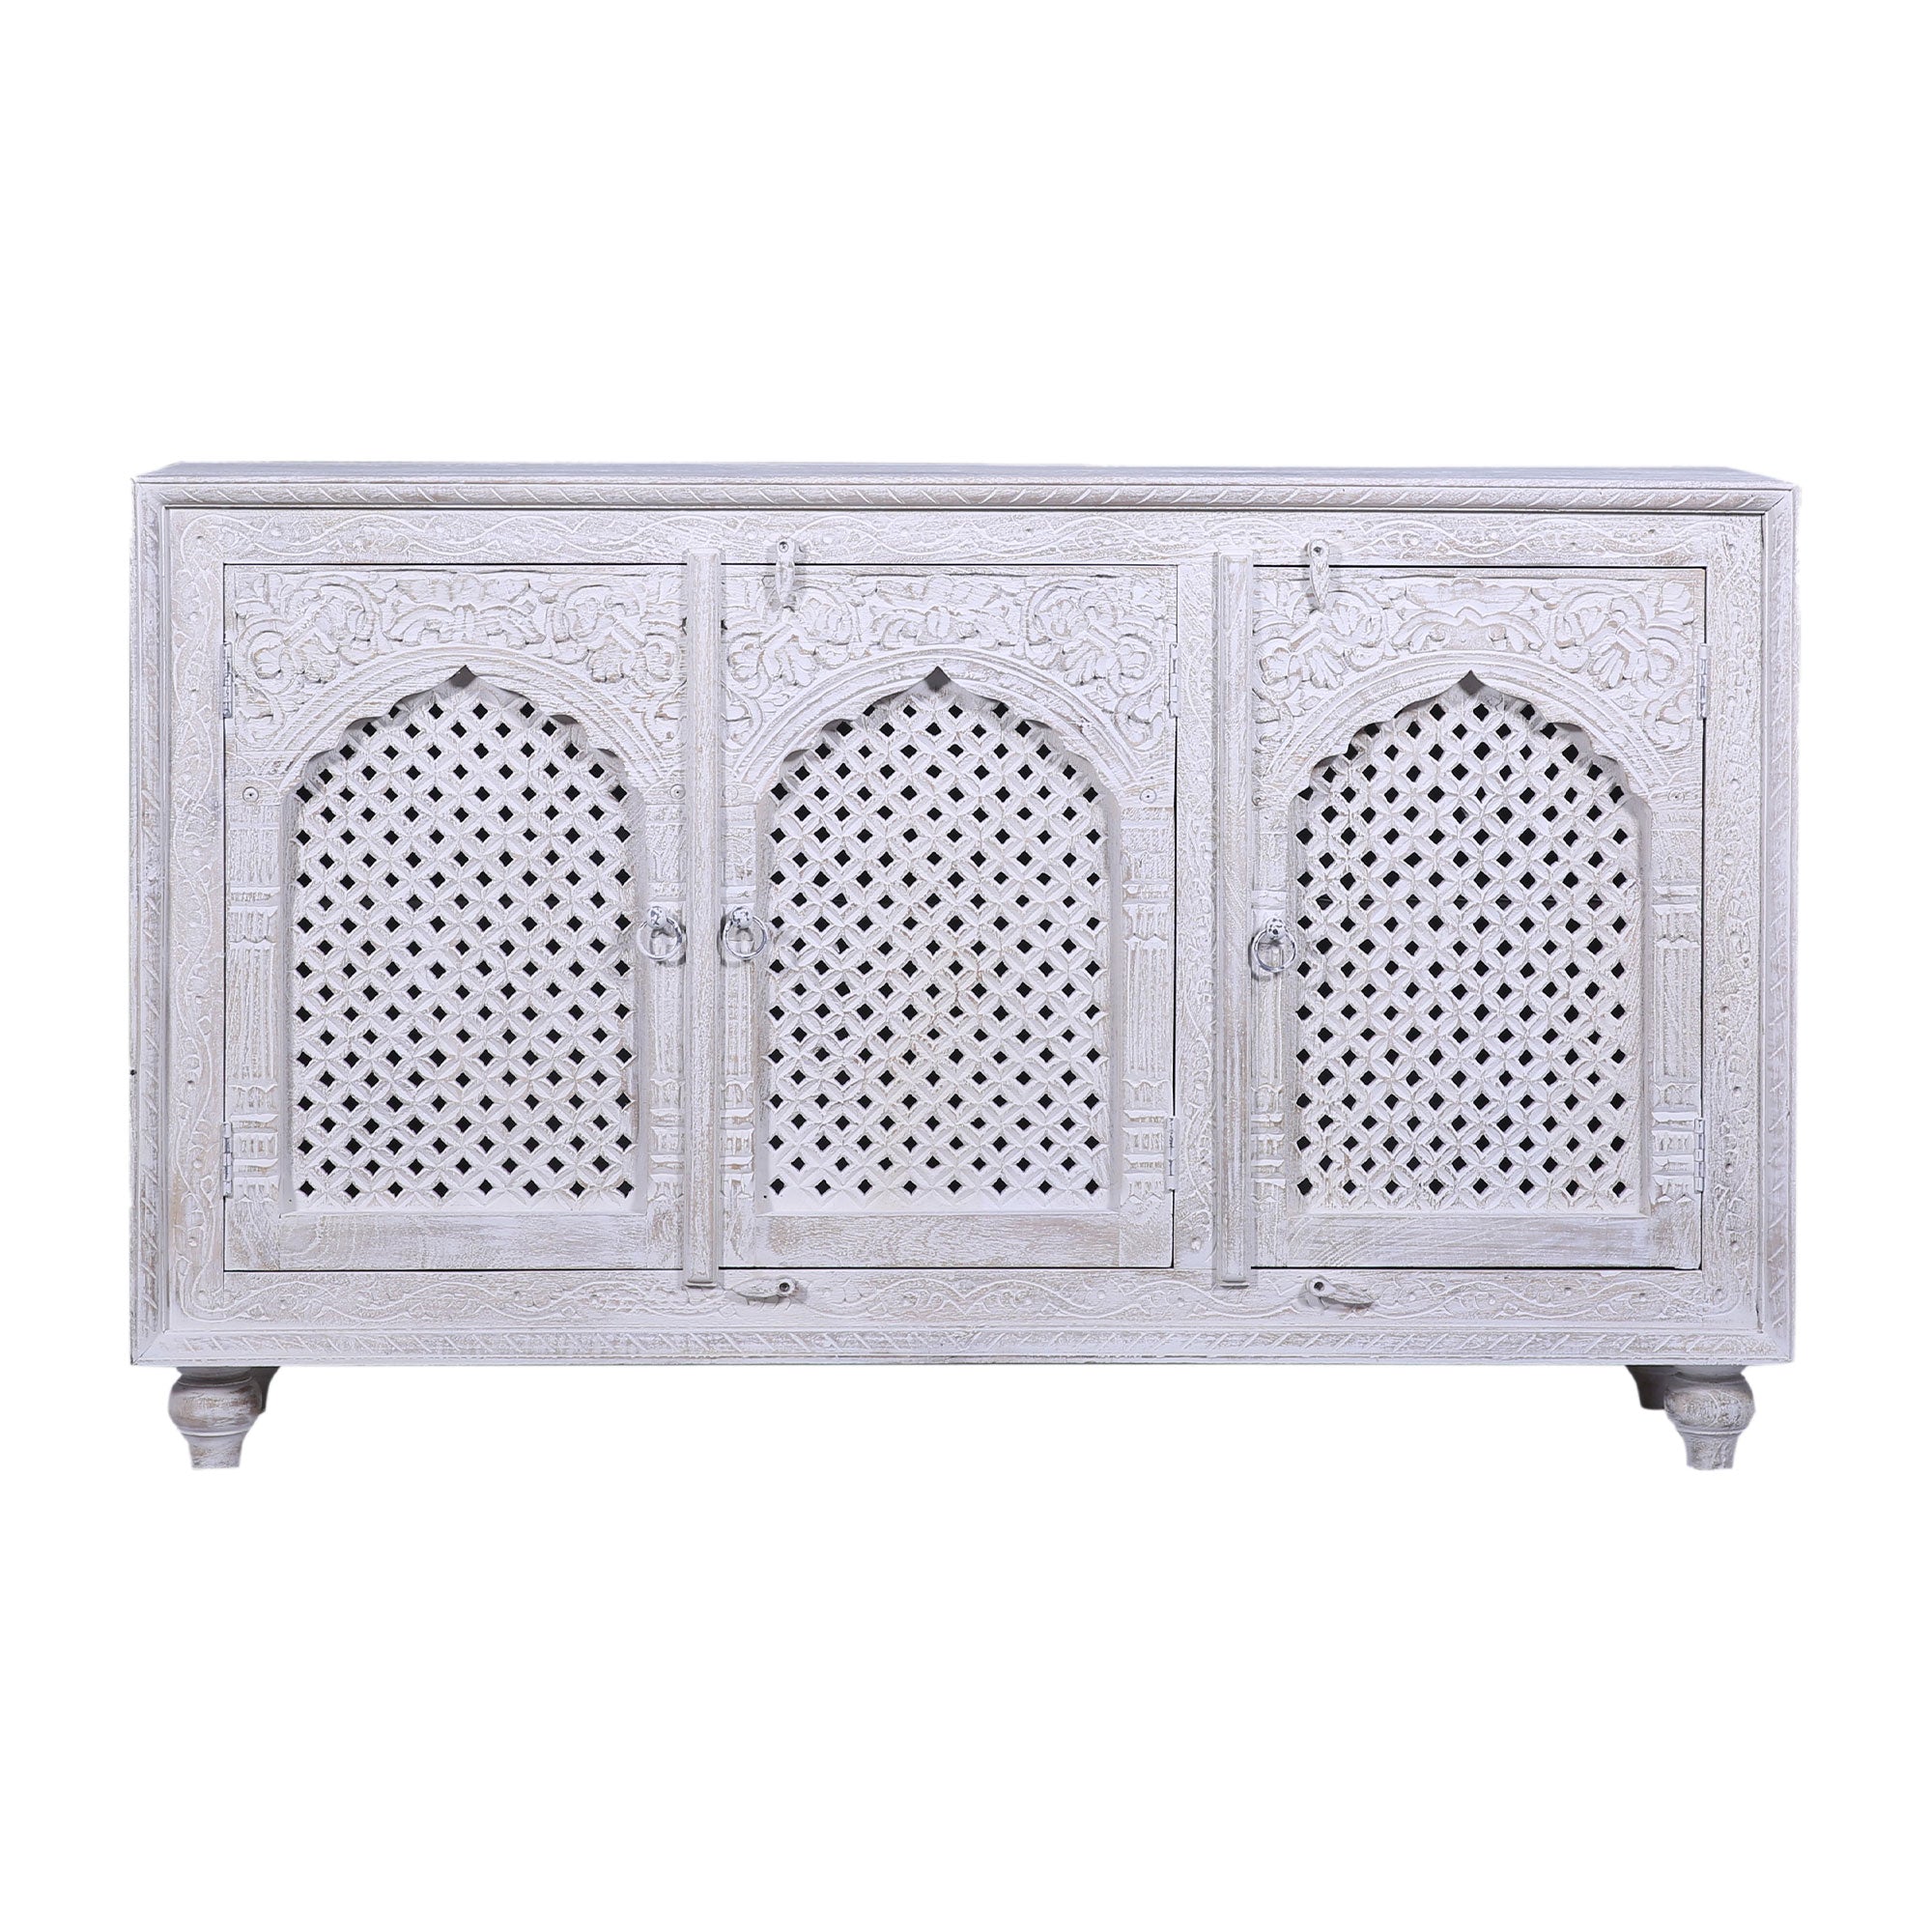 Patrin Nomad Wooden Sideboard in Distressed White Finish in Cabinets by VMInnovations